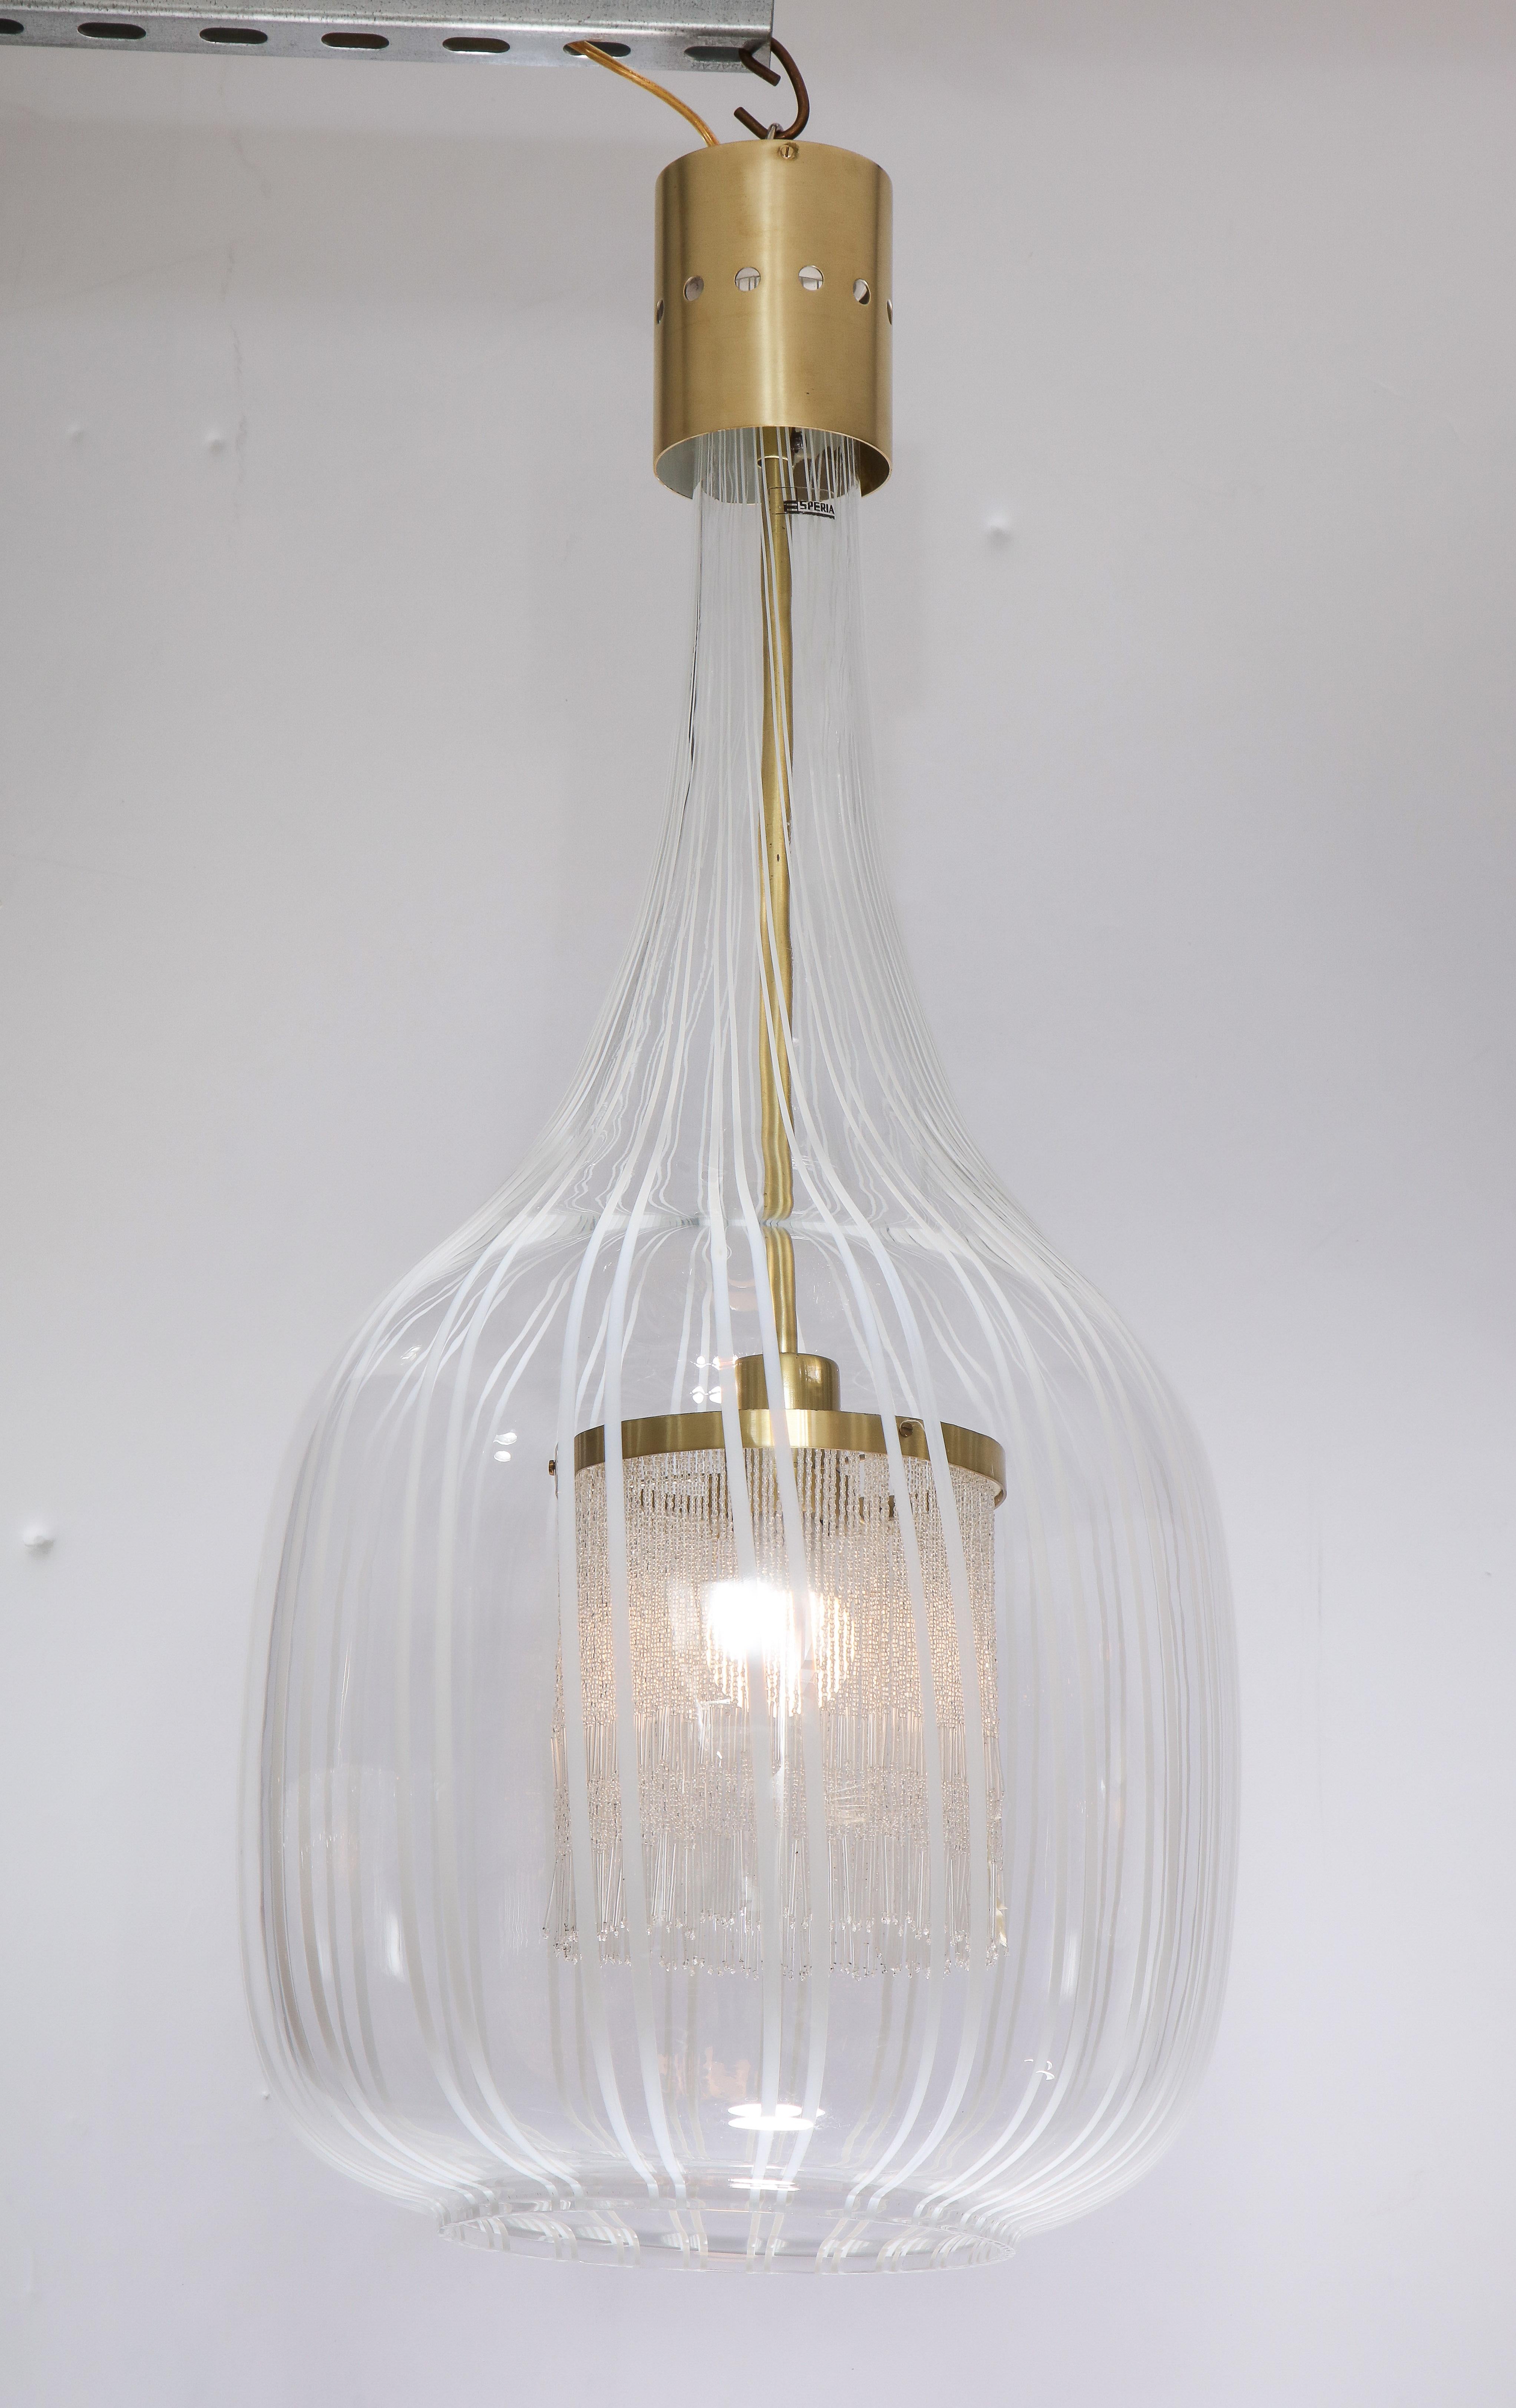 A unique and beautiful pendant chandelier by designer Angelo Brotto, (1914-2002) made for Esperia in blown Murano glass with white vertical lines, the interior fitted with a fringe which surrounds the light bulb creating a warm atmospheric glow. The